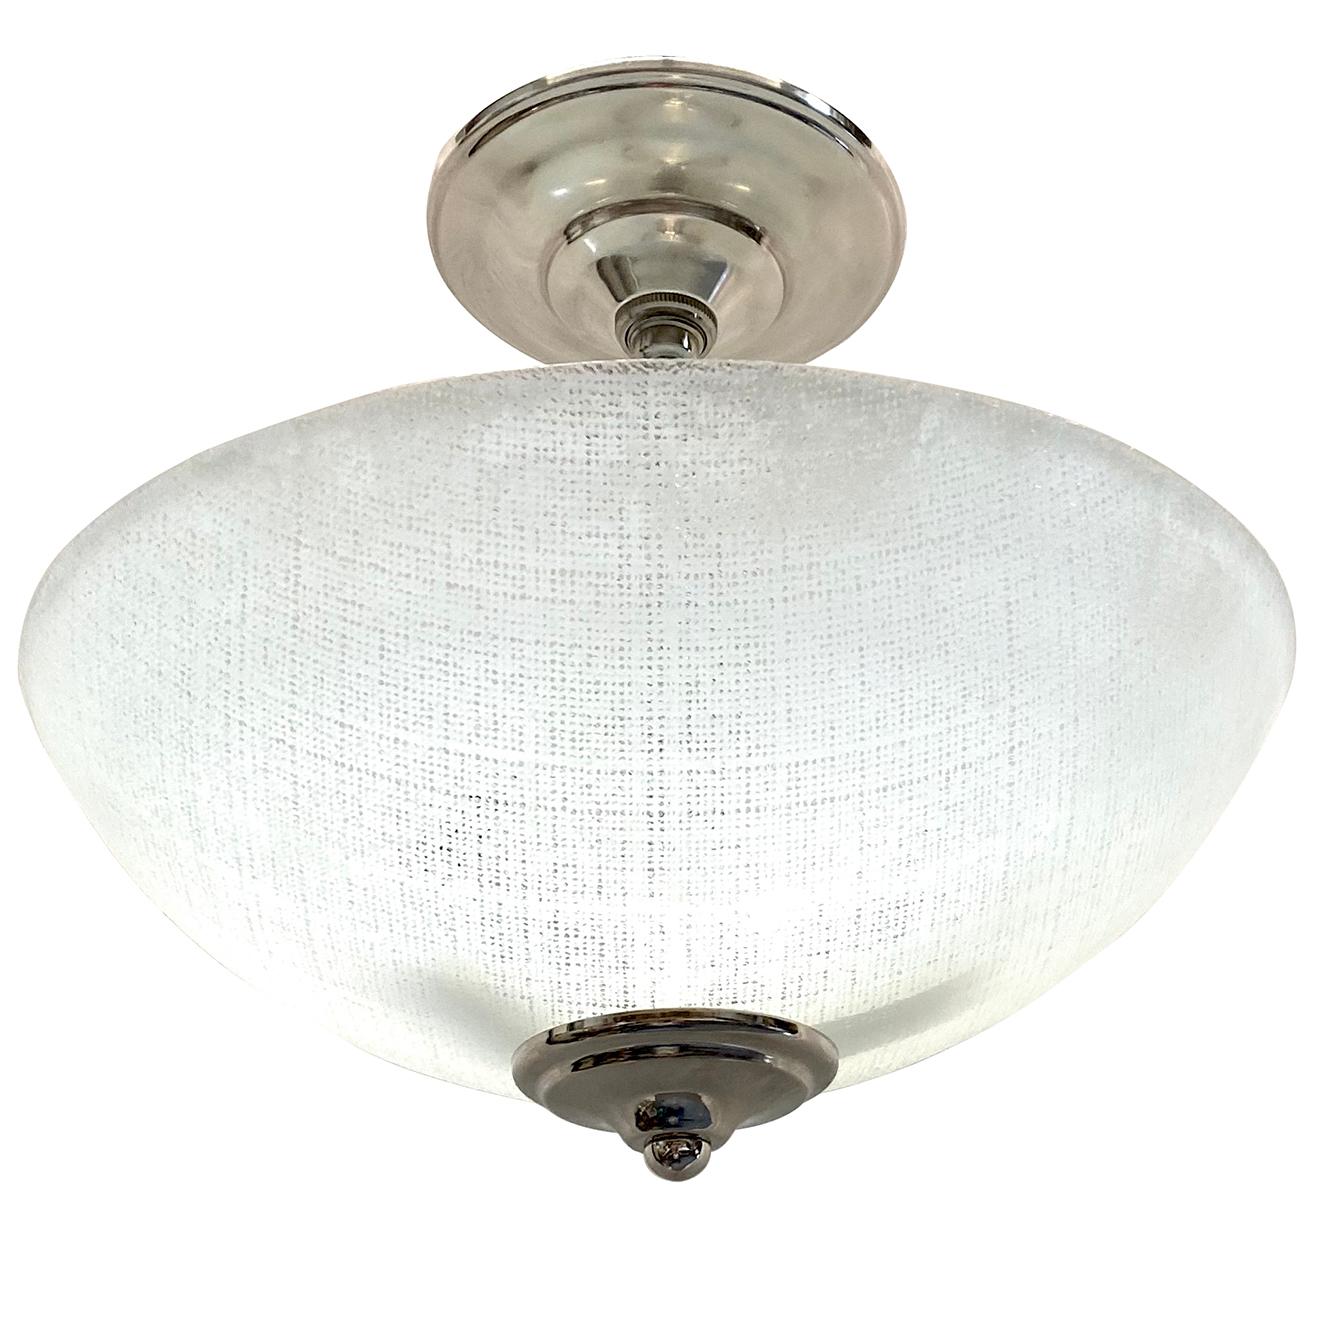 A pair of circa 1950's Italian molded glass light fixtures with three interior lights. Sold individually.

Measurements:
Diameter 12.5